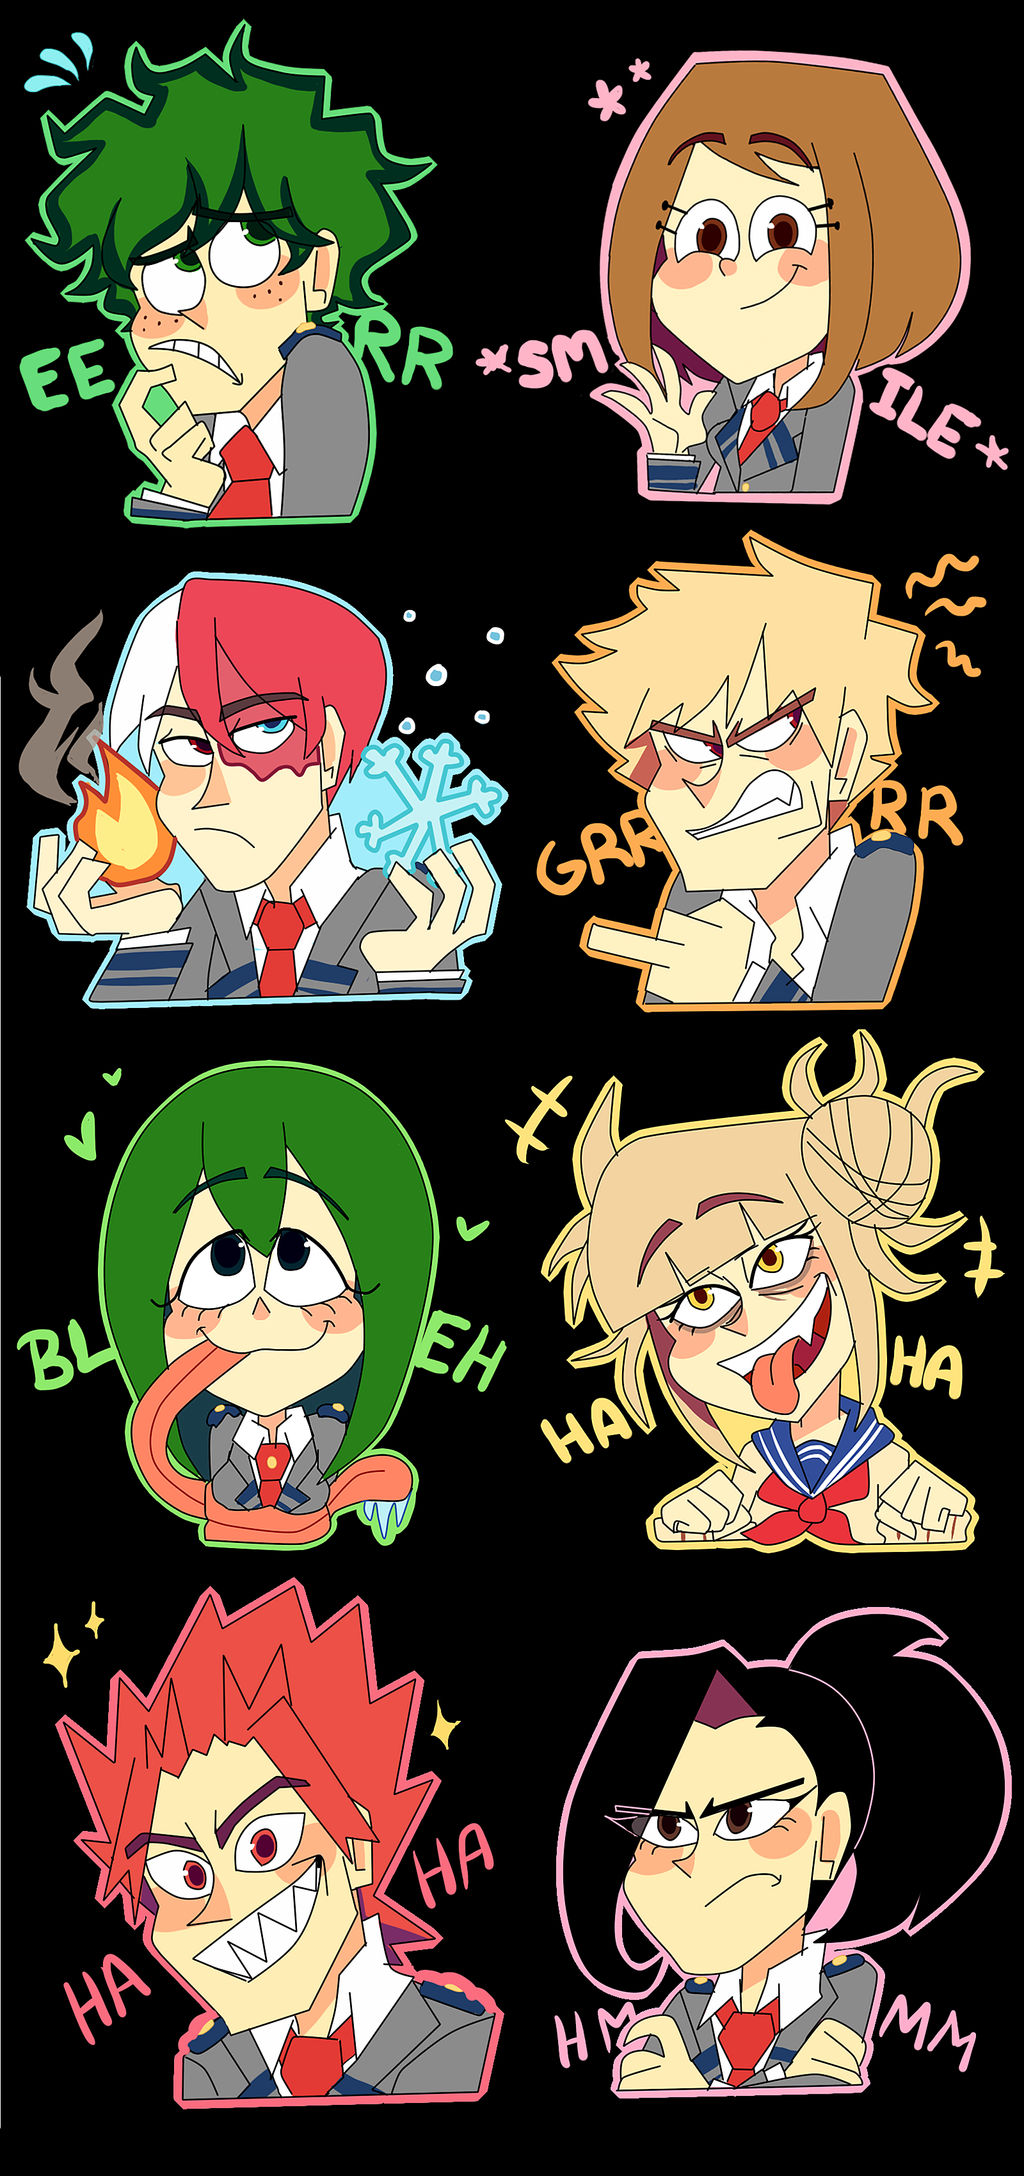 More south park stickers! by Feri-Marife on DeviantArt